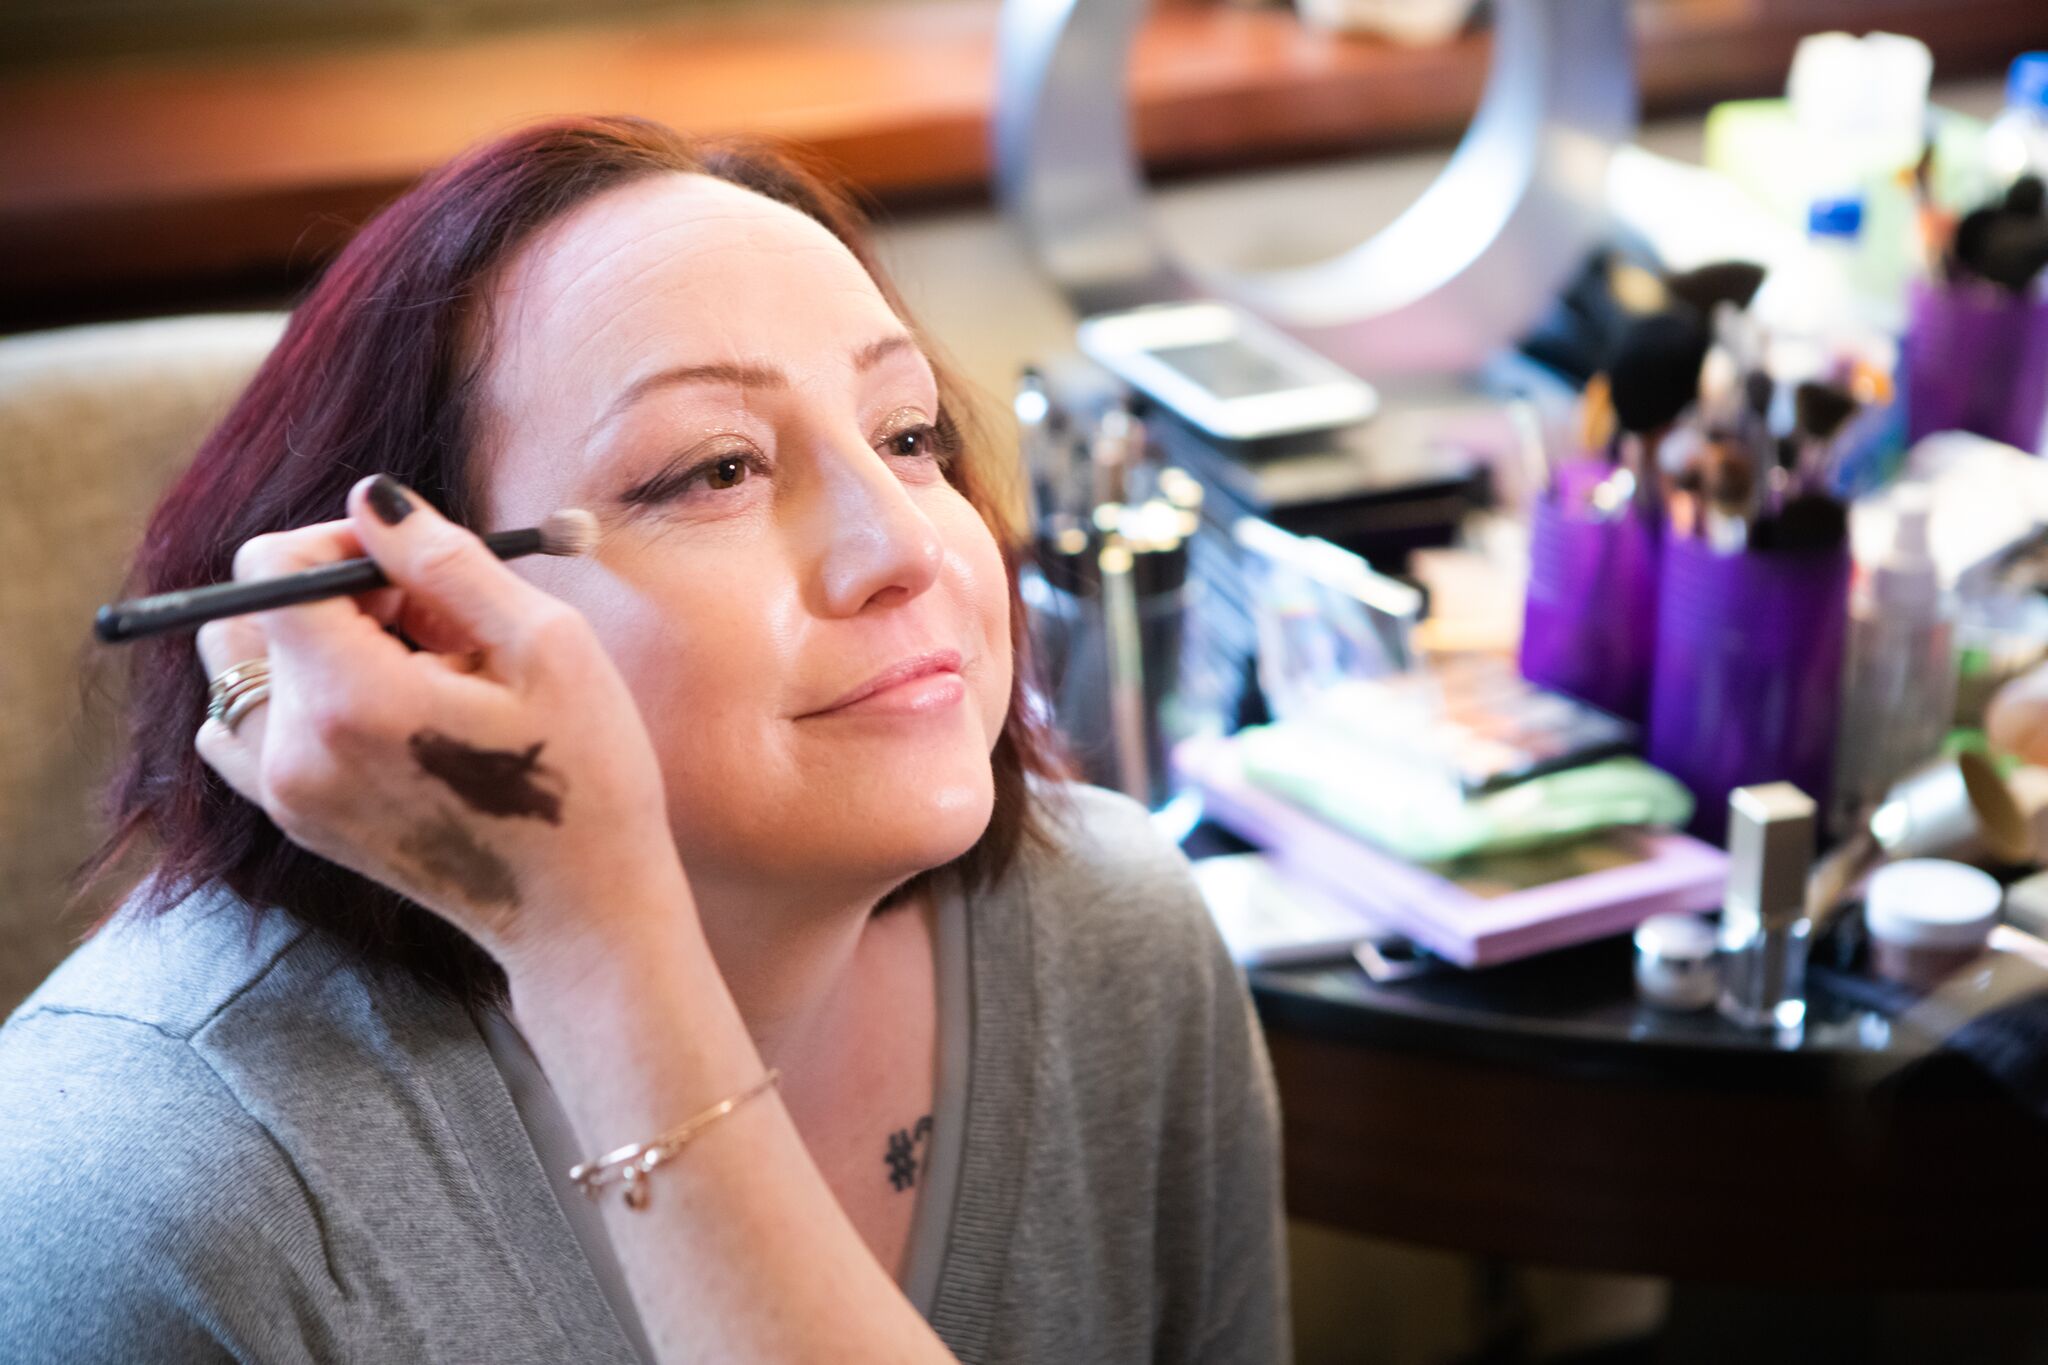 Lobato has her makeup applied by a Glam4Good team member before the Innocence Project's annual gala. Photo by Sioux Nesi.